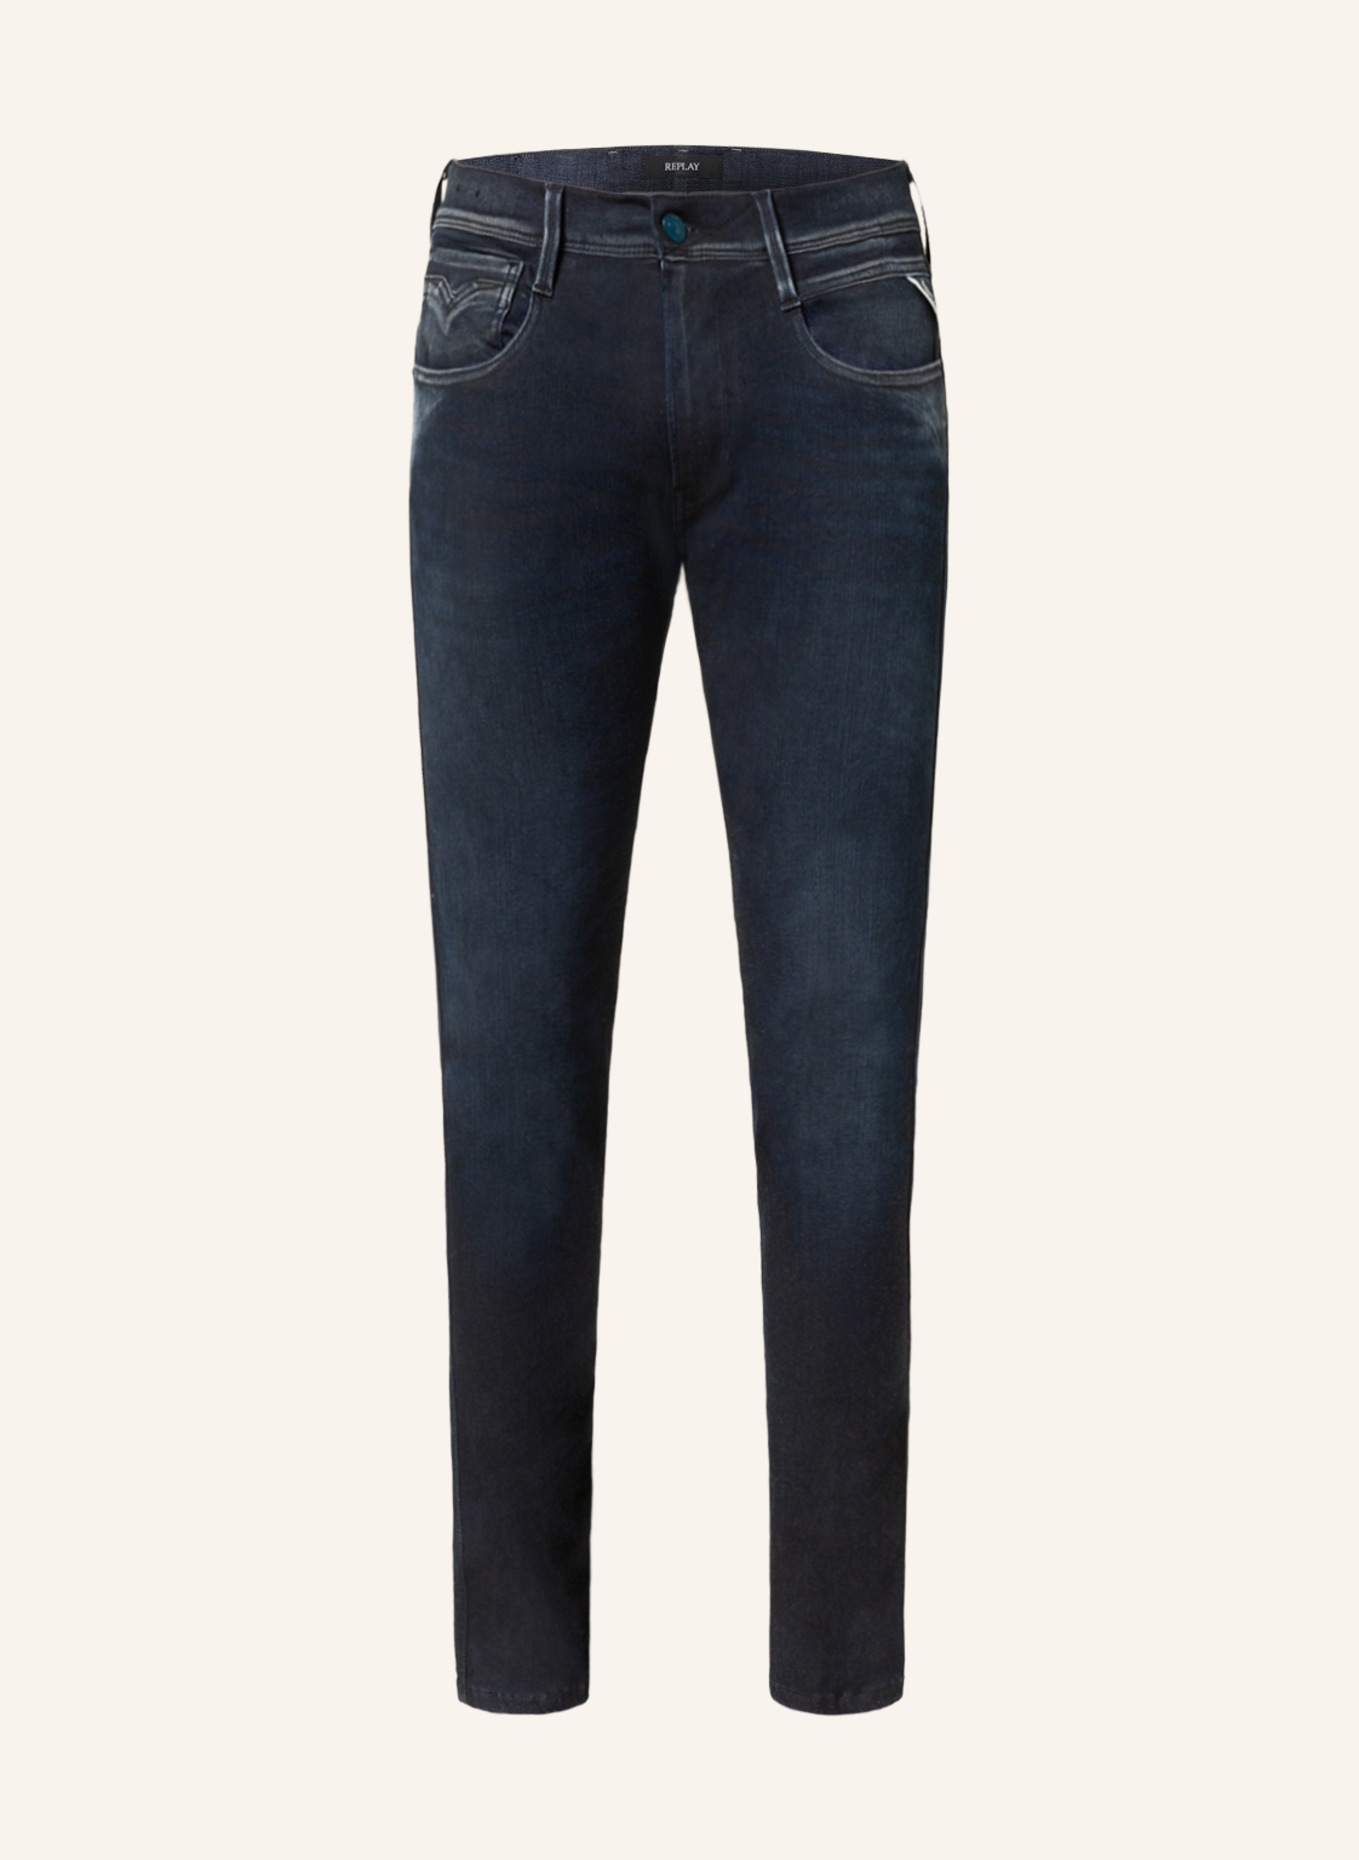 REPLAY Jeans ANBASS RE-USEDANBASS HYPERFLEX RE-USED slim fit, Color: 007 DARK BLUE (Image 1)